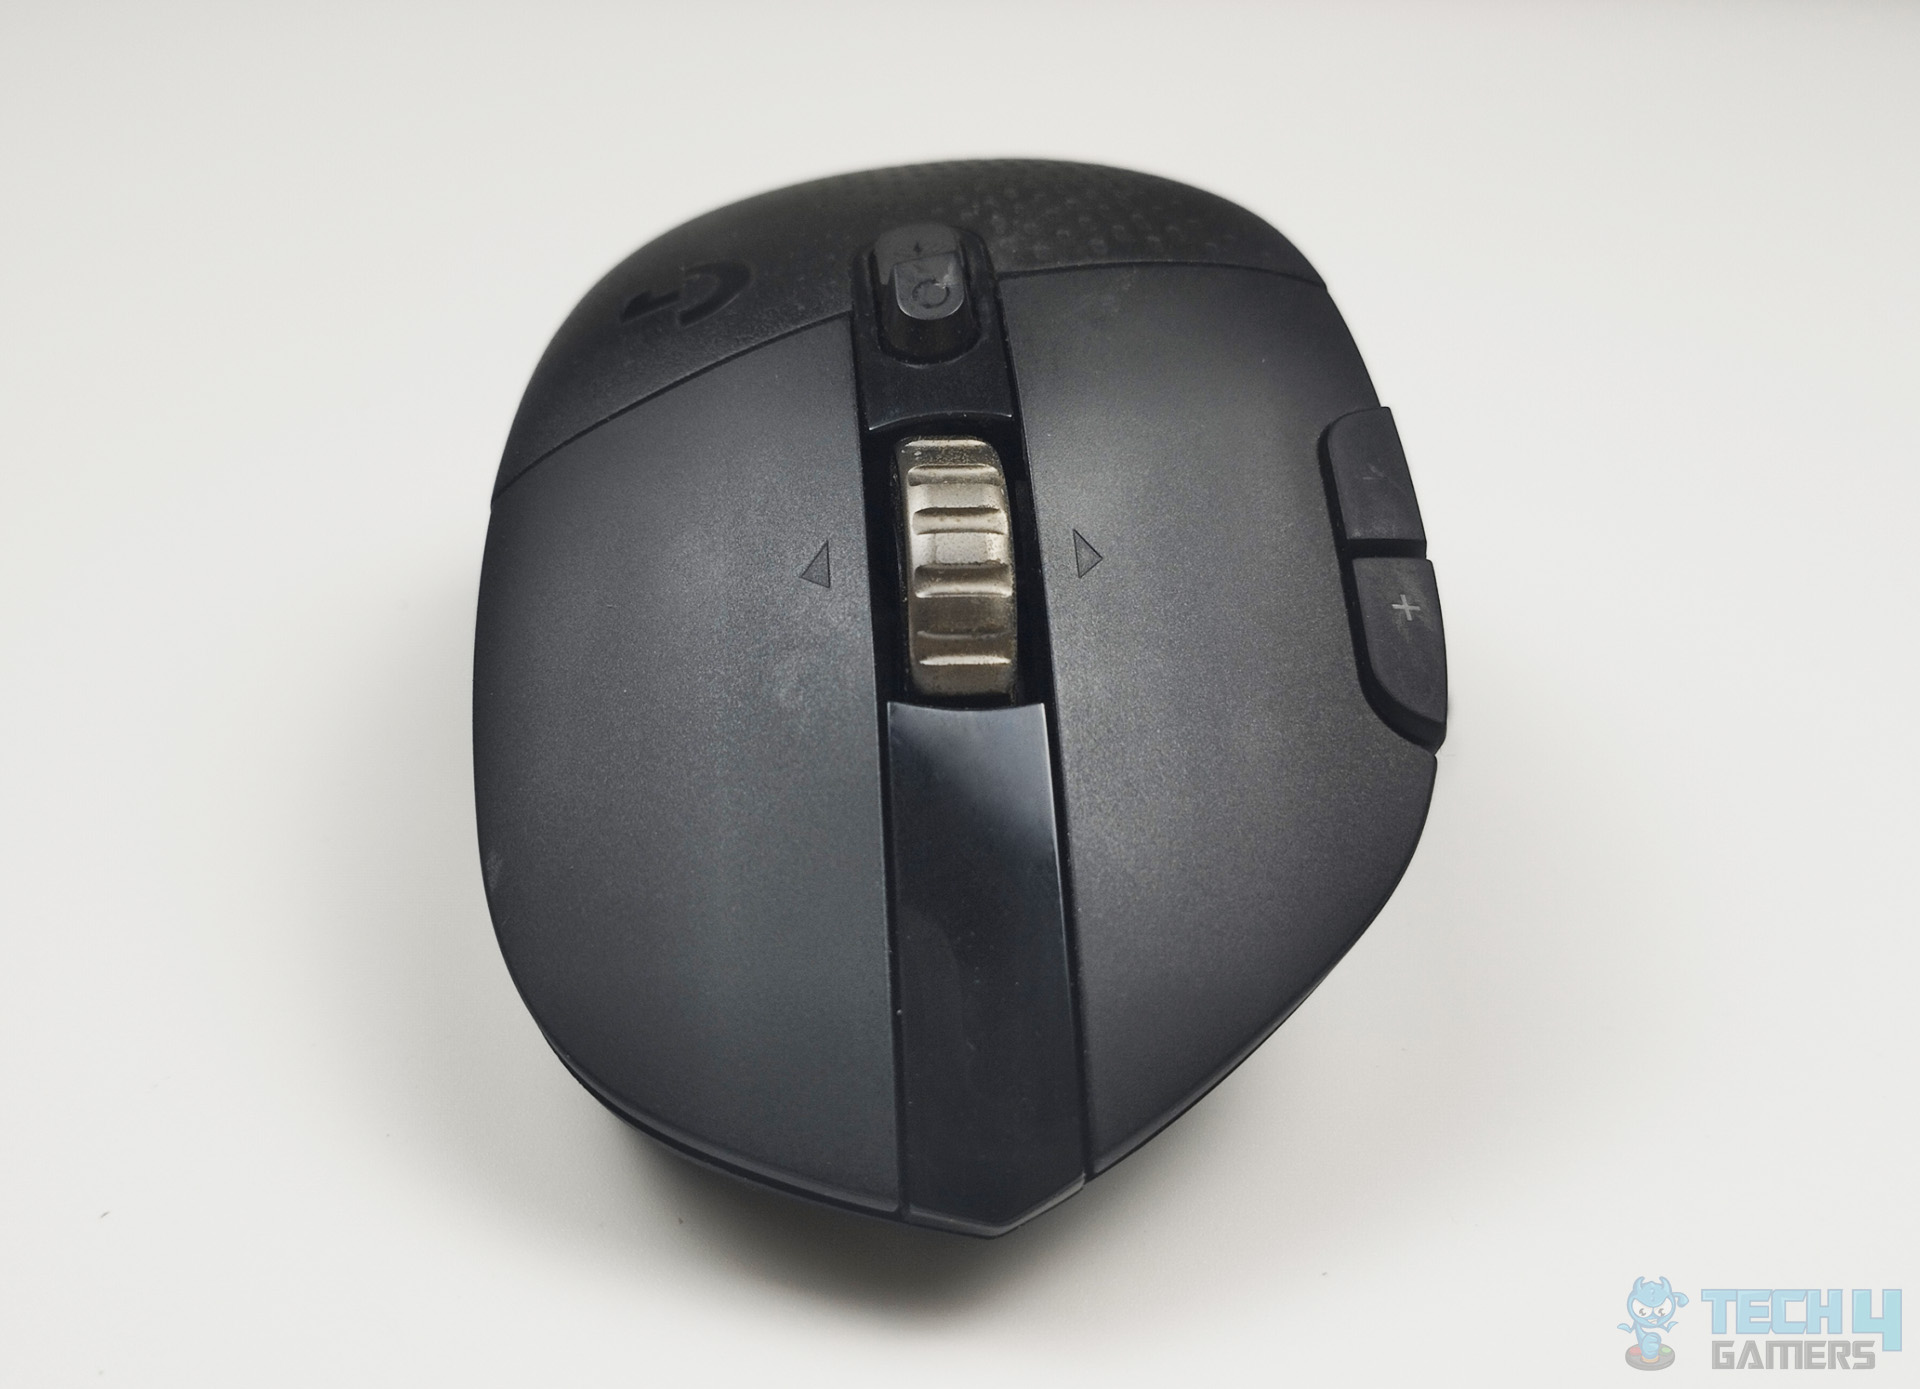 Logitech G604 Lightspeed - Build Quality (Image By Tech4Gamers)